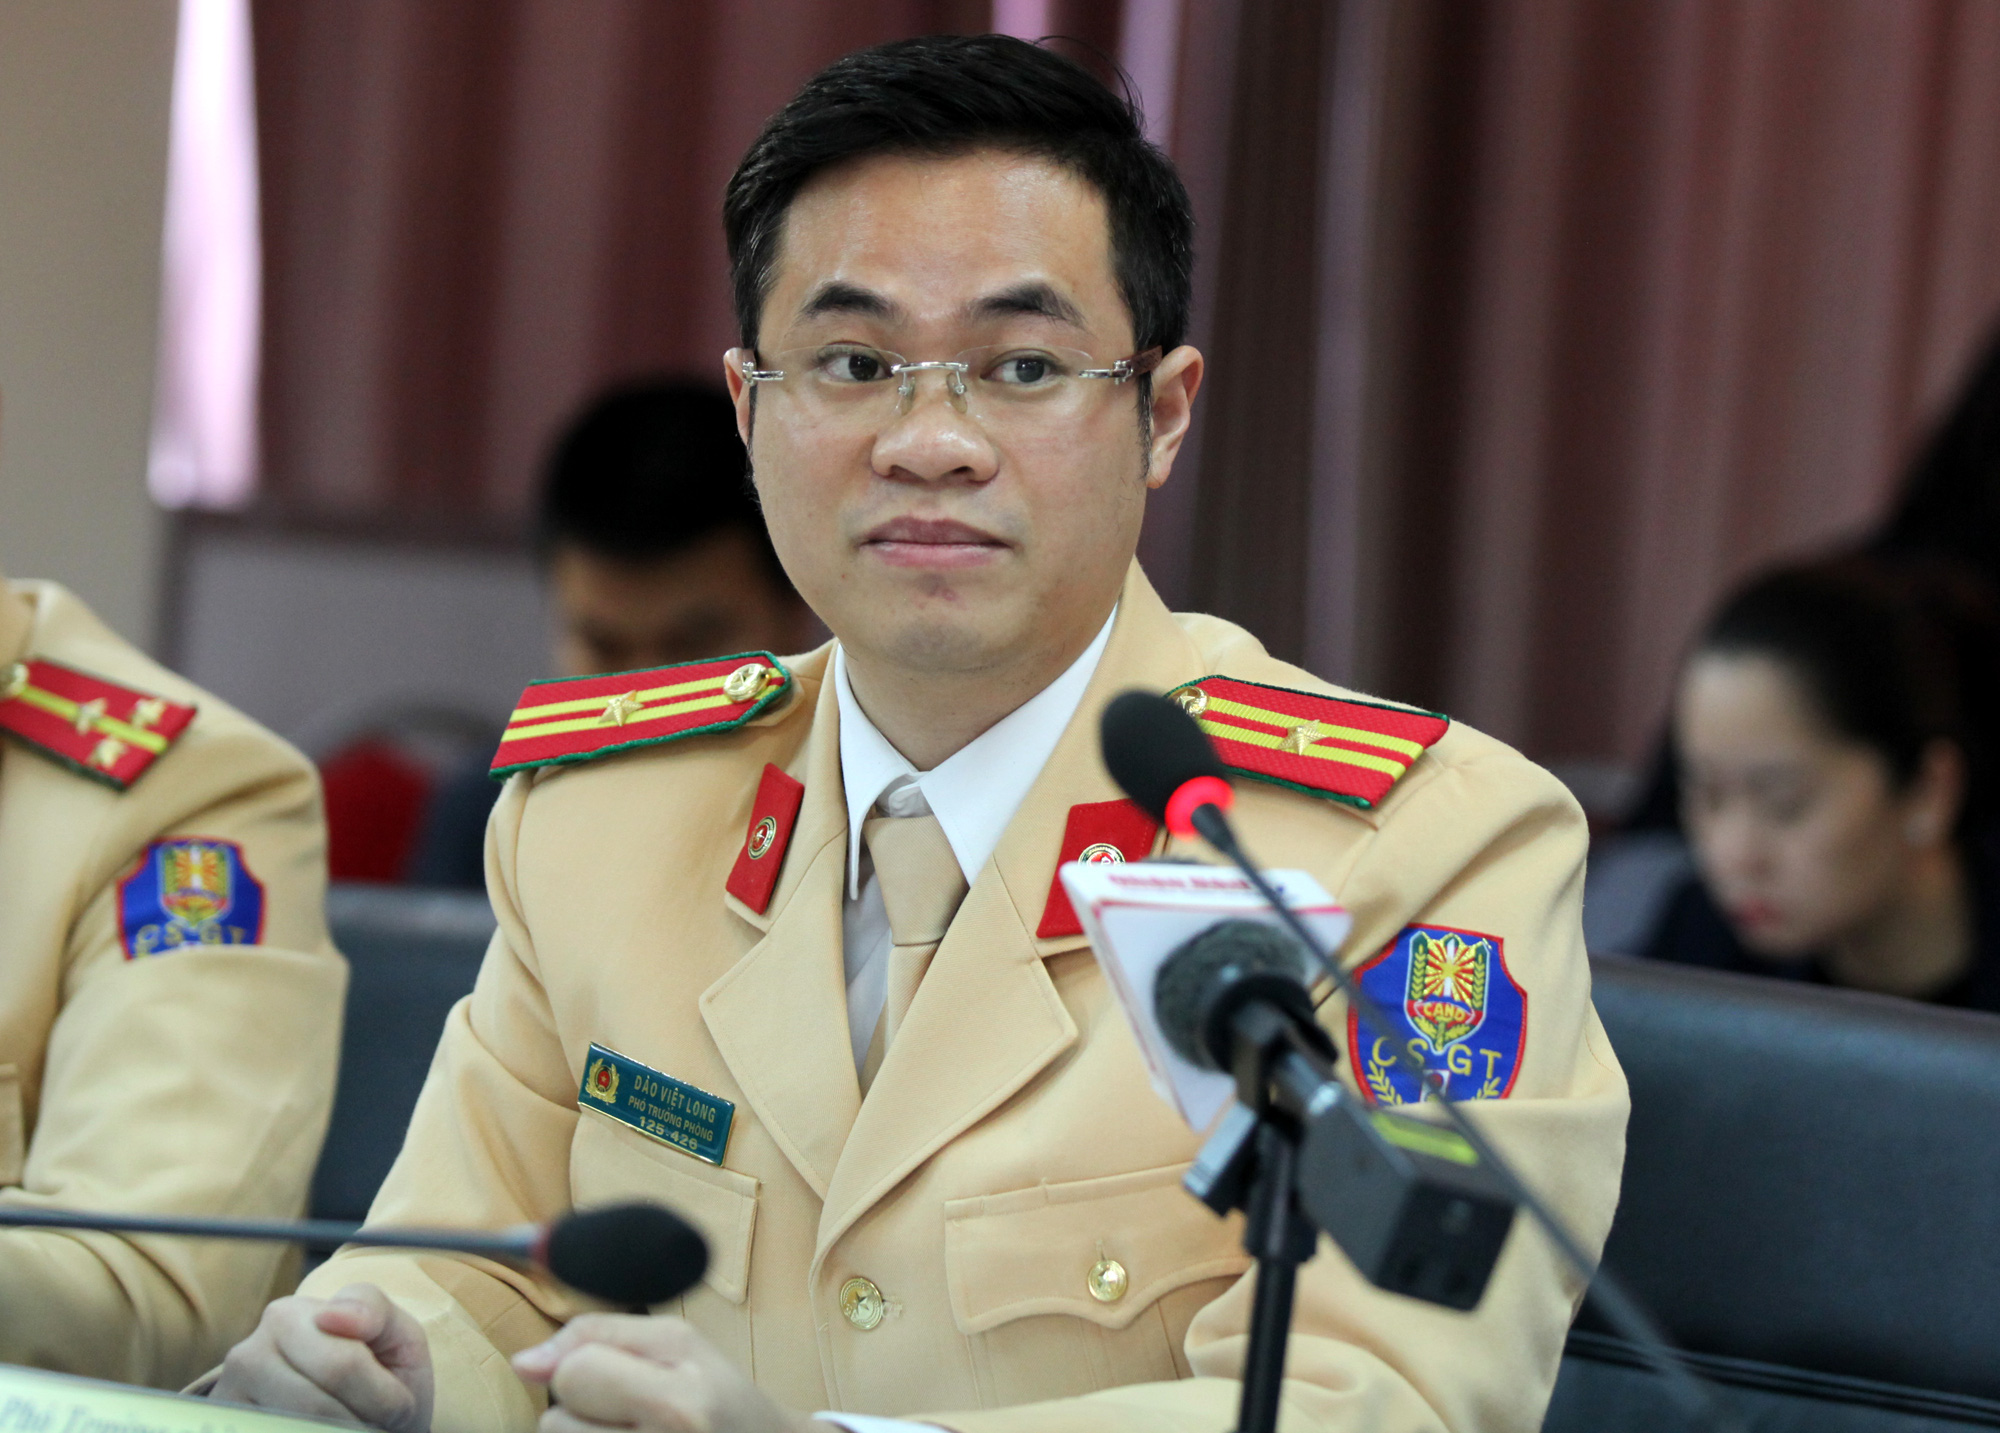 Dao Viet Long, deputy head of Hanoi’s Traffic Police, speaks at an online conference from Hanoi on January 9, 2020. Photo: Tuan Phung / Tuoi Tre